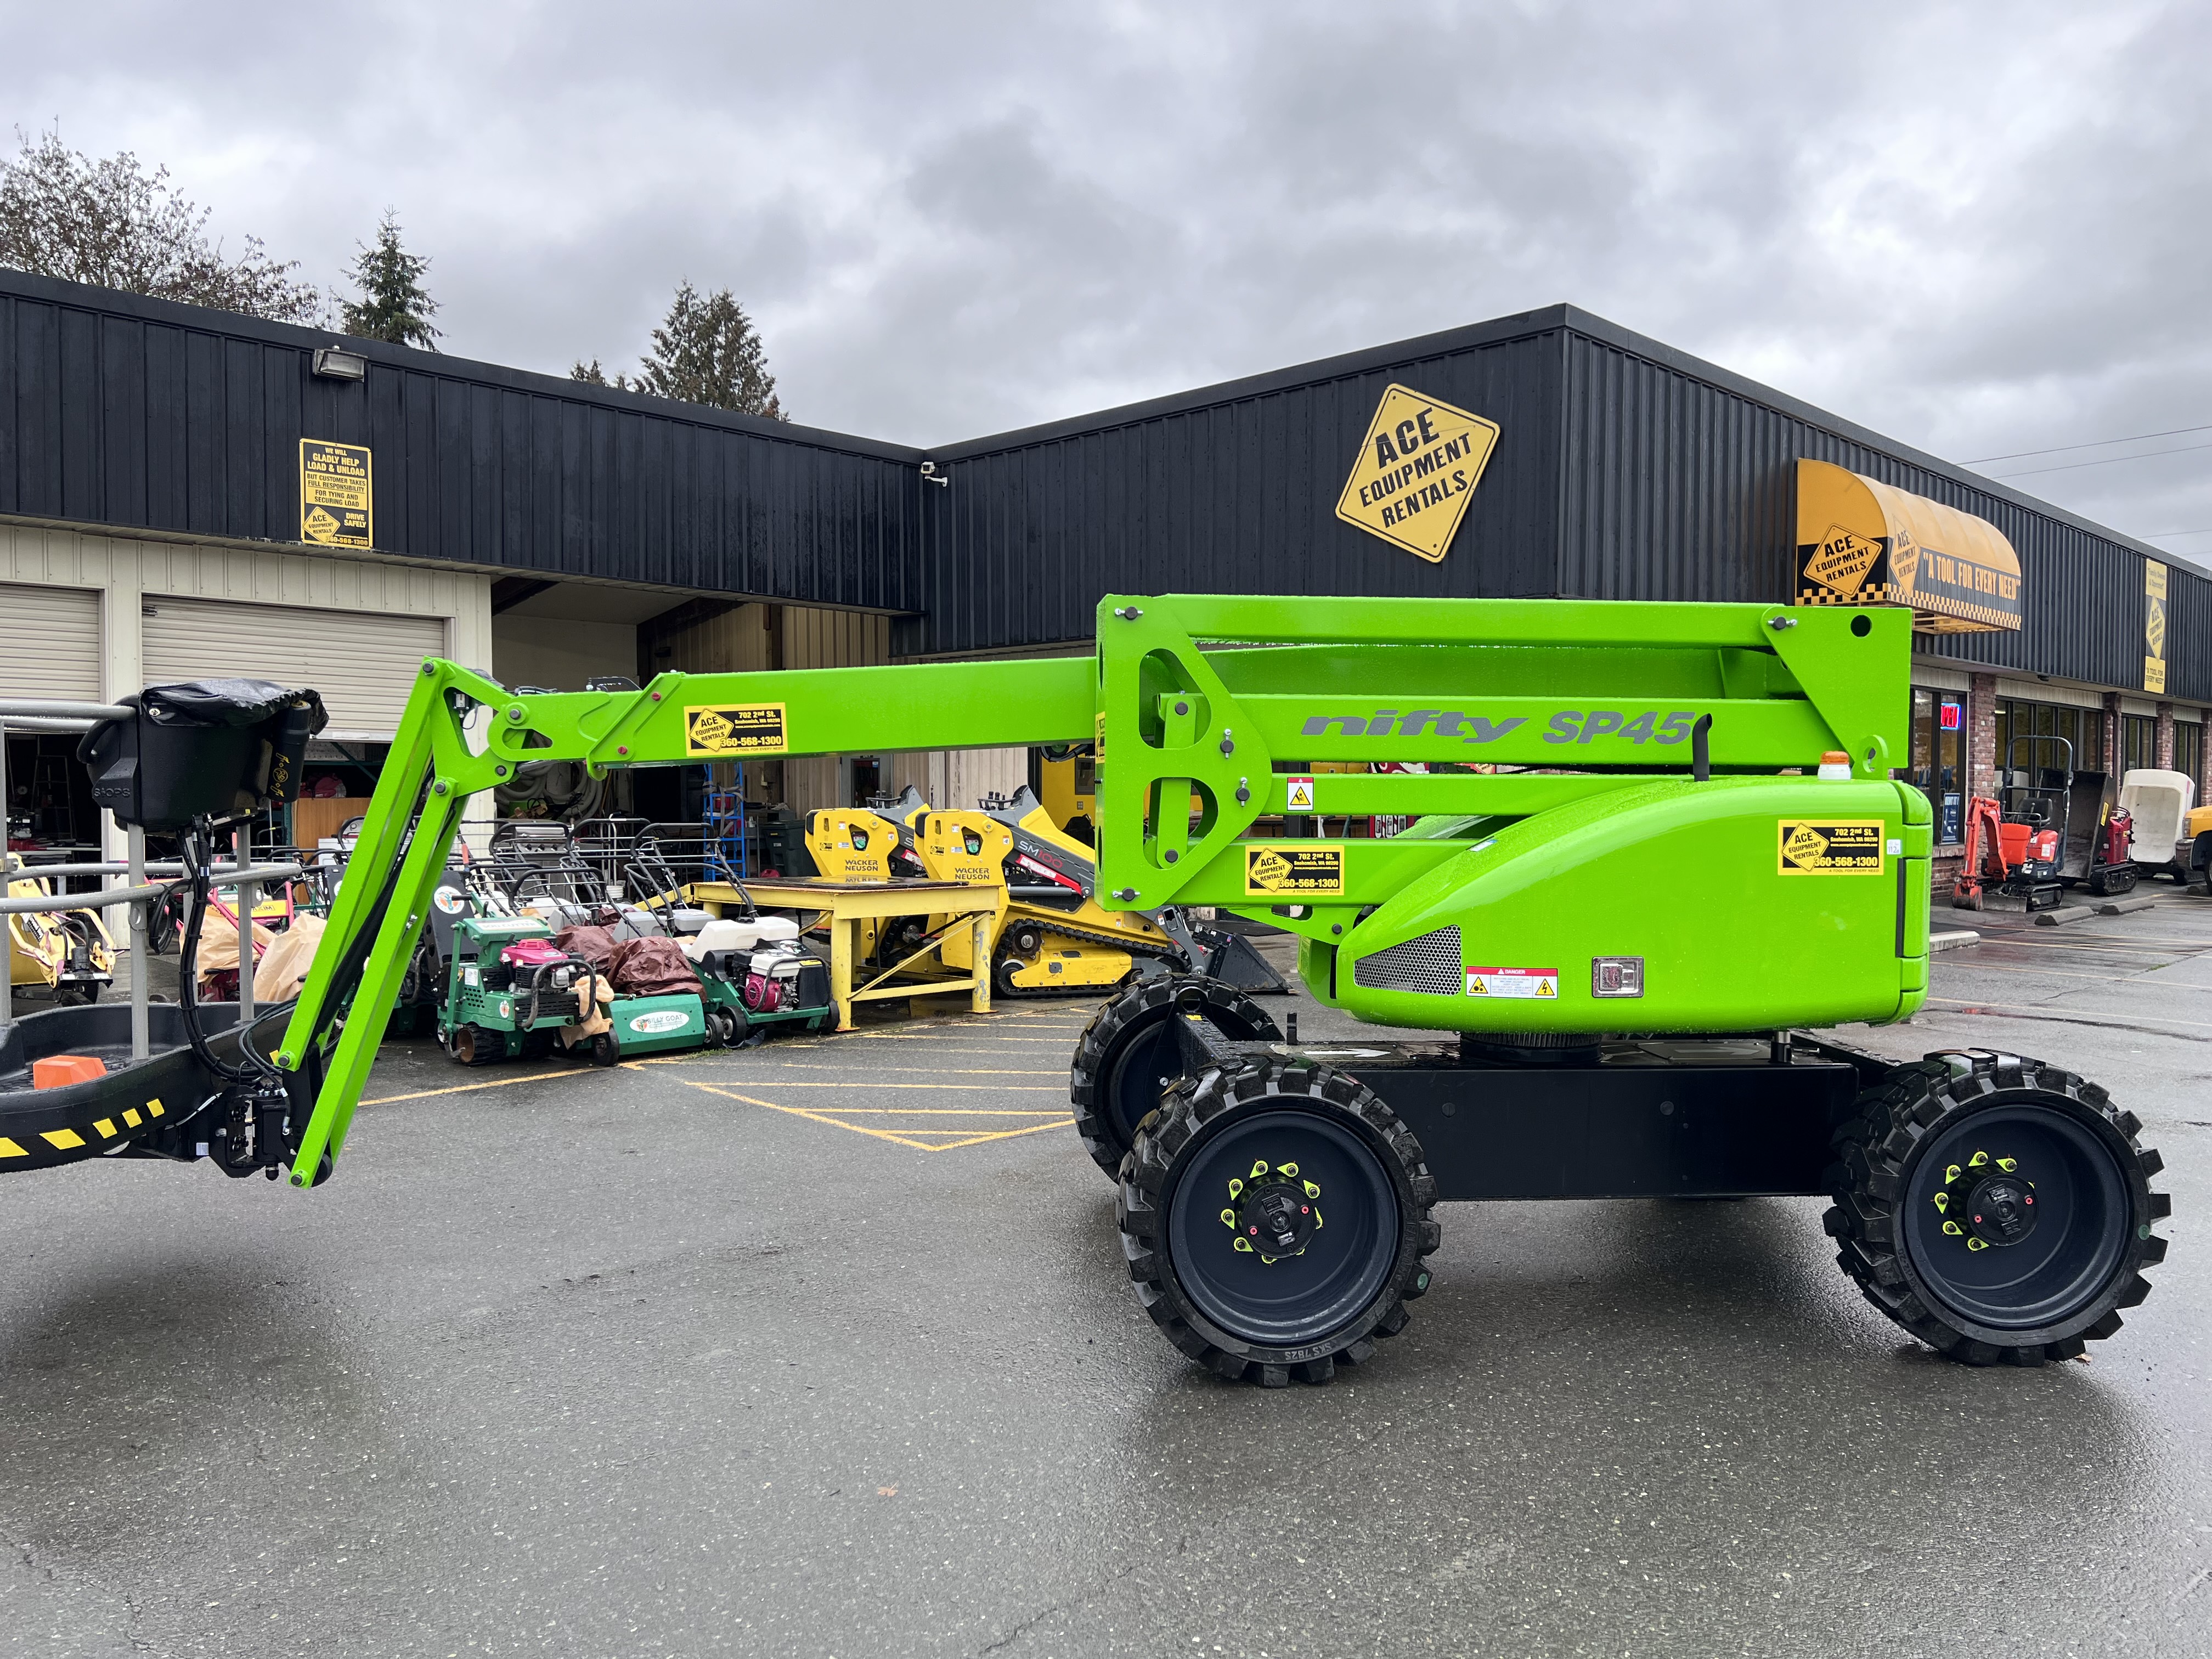 Nifty SP45D Boom Lift Rental from Ace Equipment Rentals in Snohomish, WA